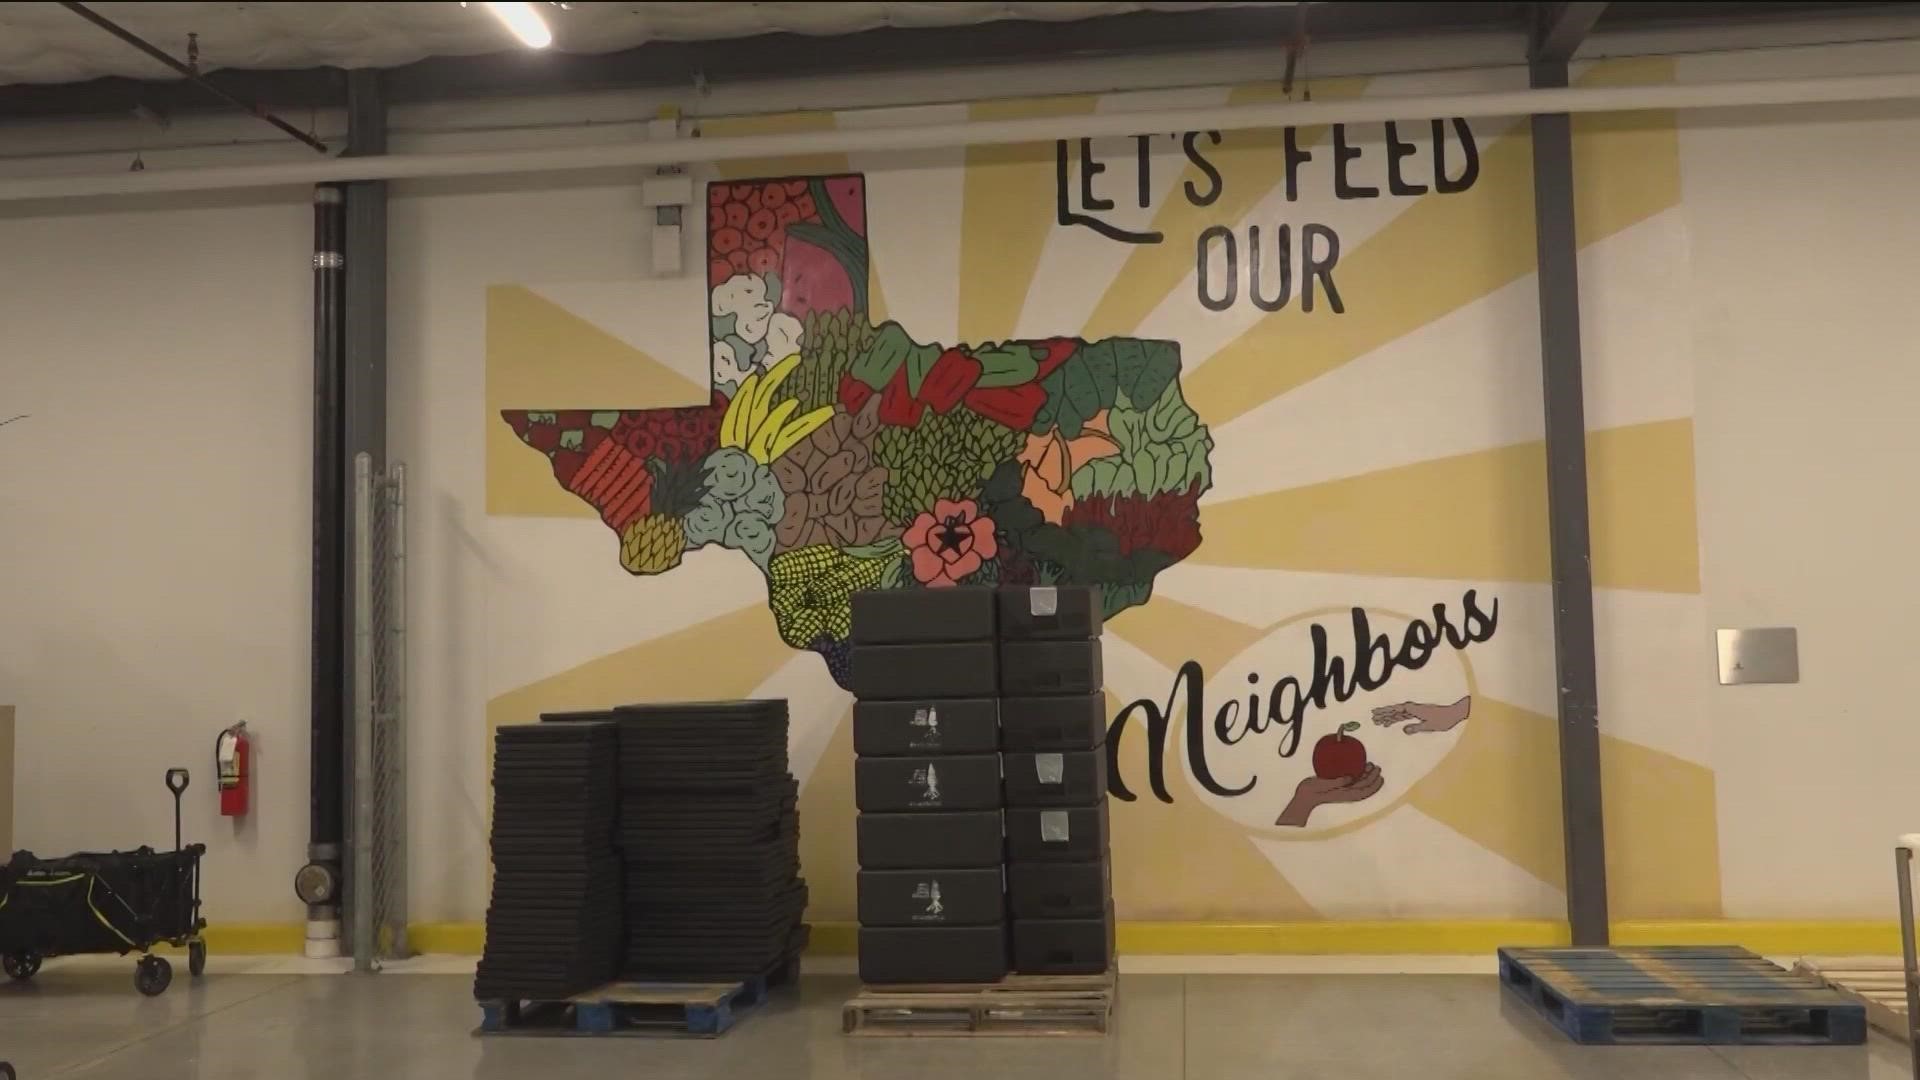 "Fed Today, Work Tomorrow" will provide food and job placement assistance to those in need. KVUE's Eric Pointer spoke with two of the people behind the event.